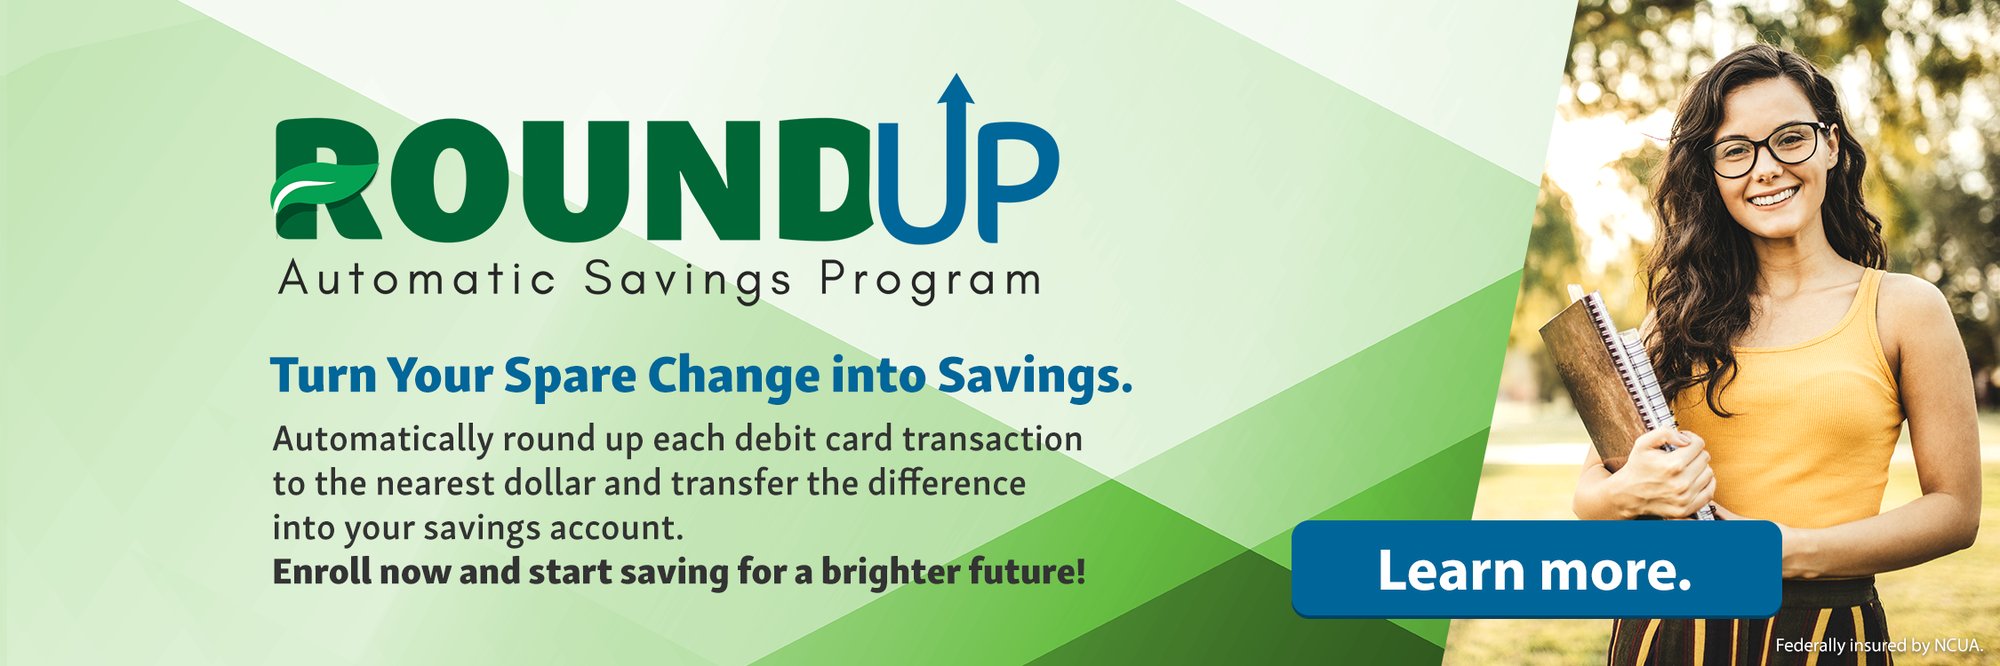 Round Up Automatic Savings Program. Turn Your Spare Change into Savings. Automatically round up each debit card transaction to the nearest dollar and transfer the difference into your savings account. Enroll now and start saving for a brighter future! Learn more. (Federally insured by NCUA.)